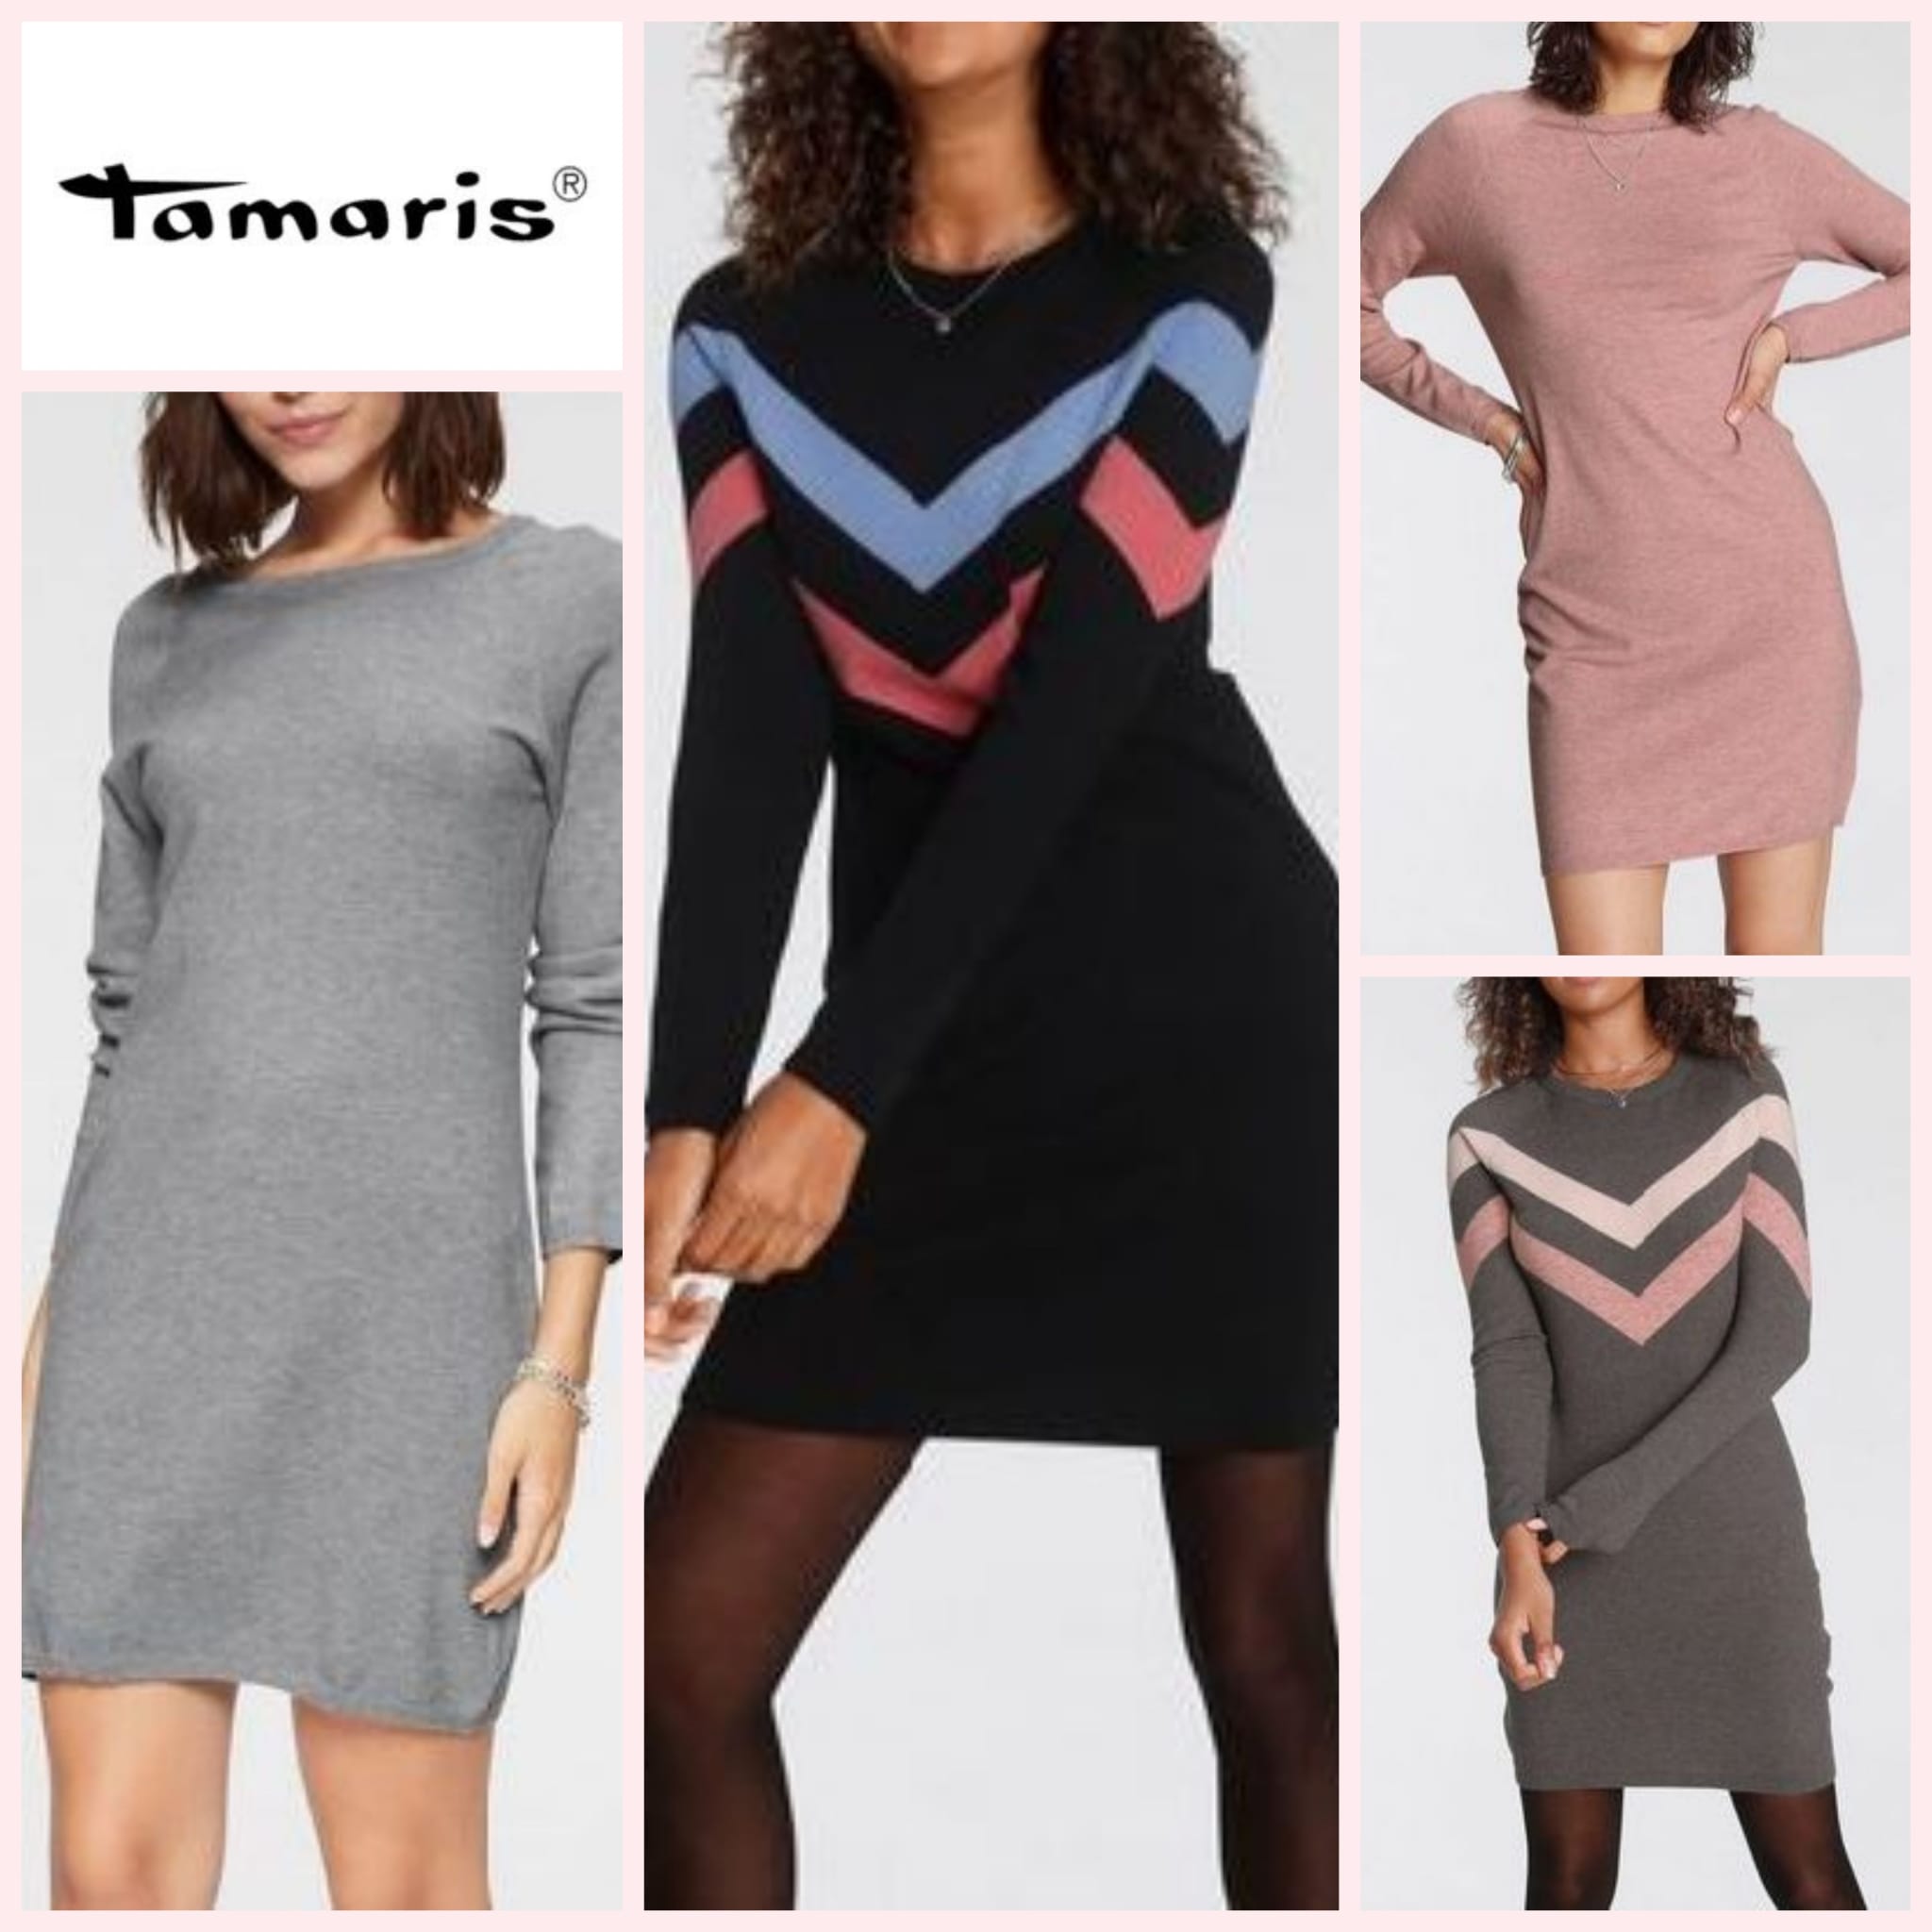 Knitted dresses from Tamaris